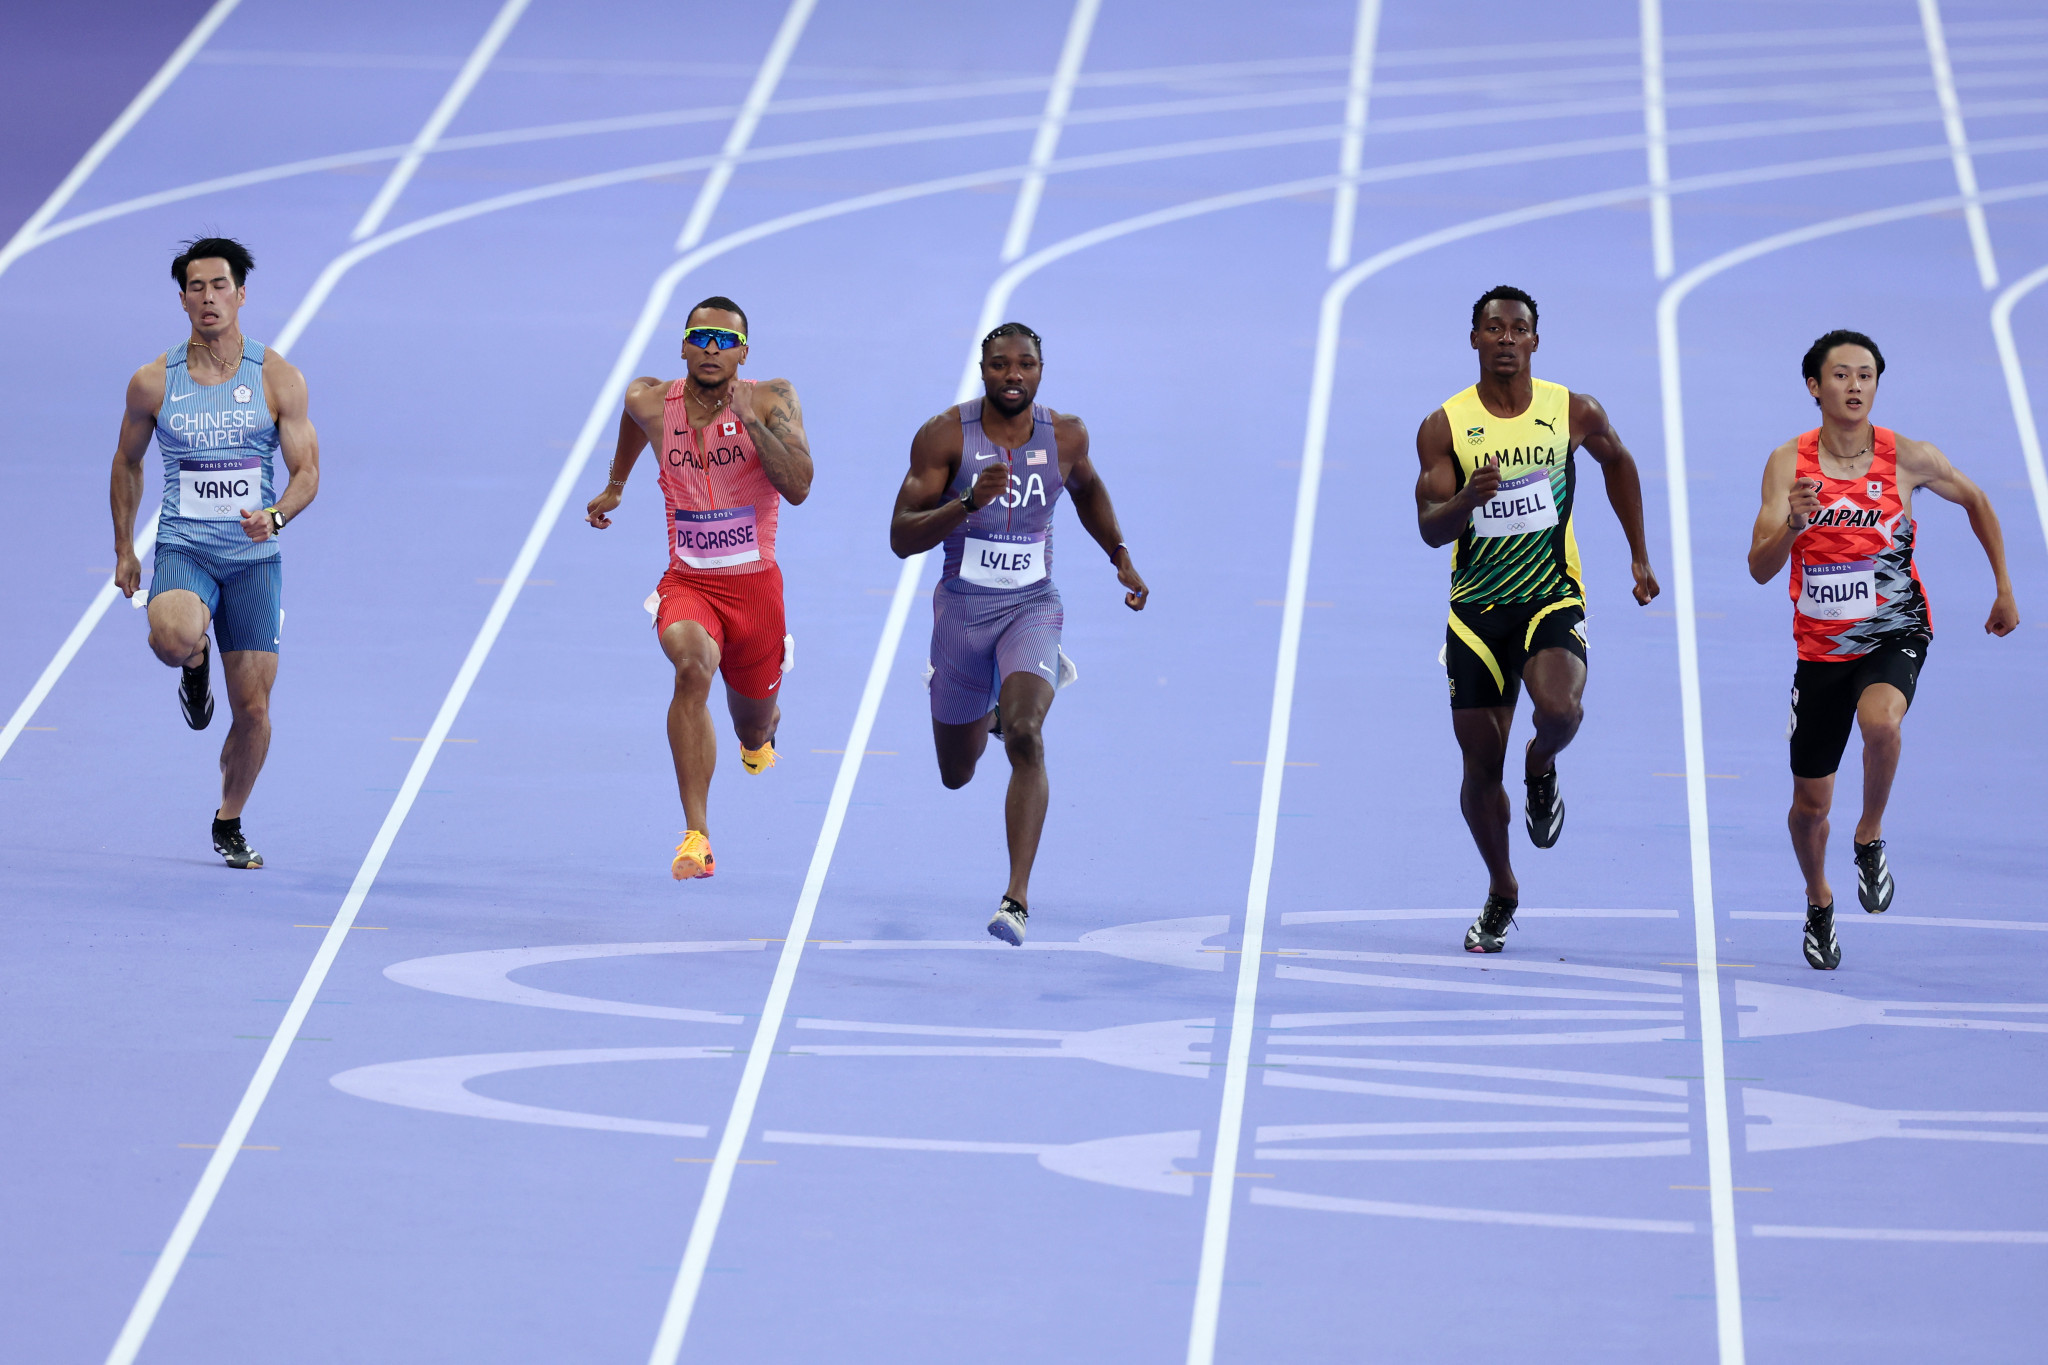 Noah Lyles of Team United States competes during the Men's 200m Round 1 at the Paris 2024 Olympic Games. GETTY IMAGES